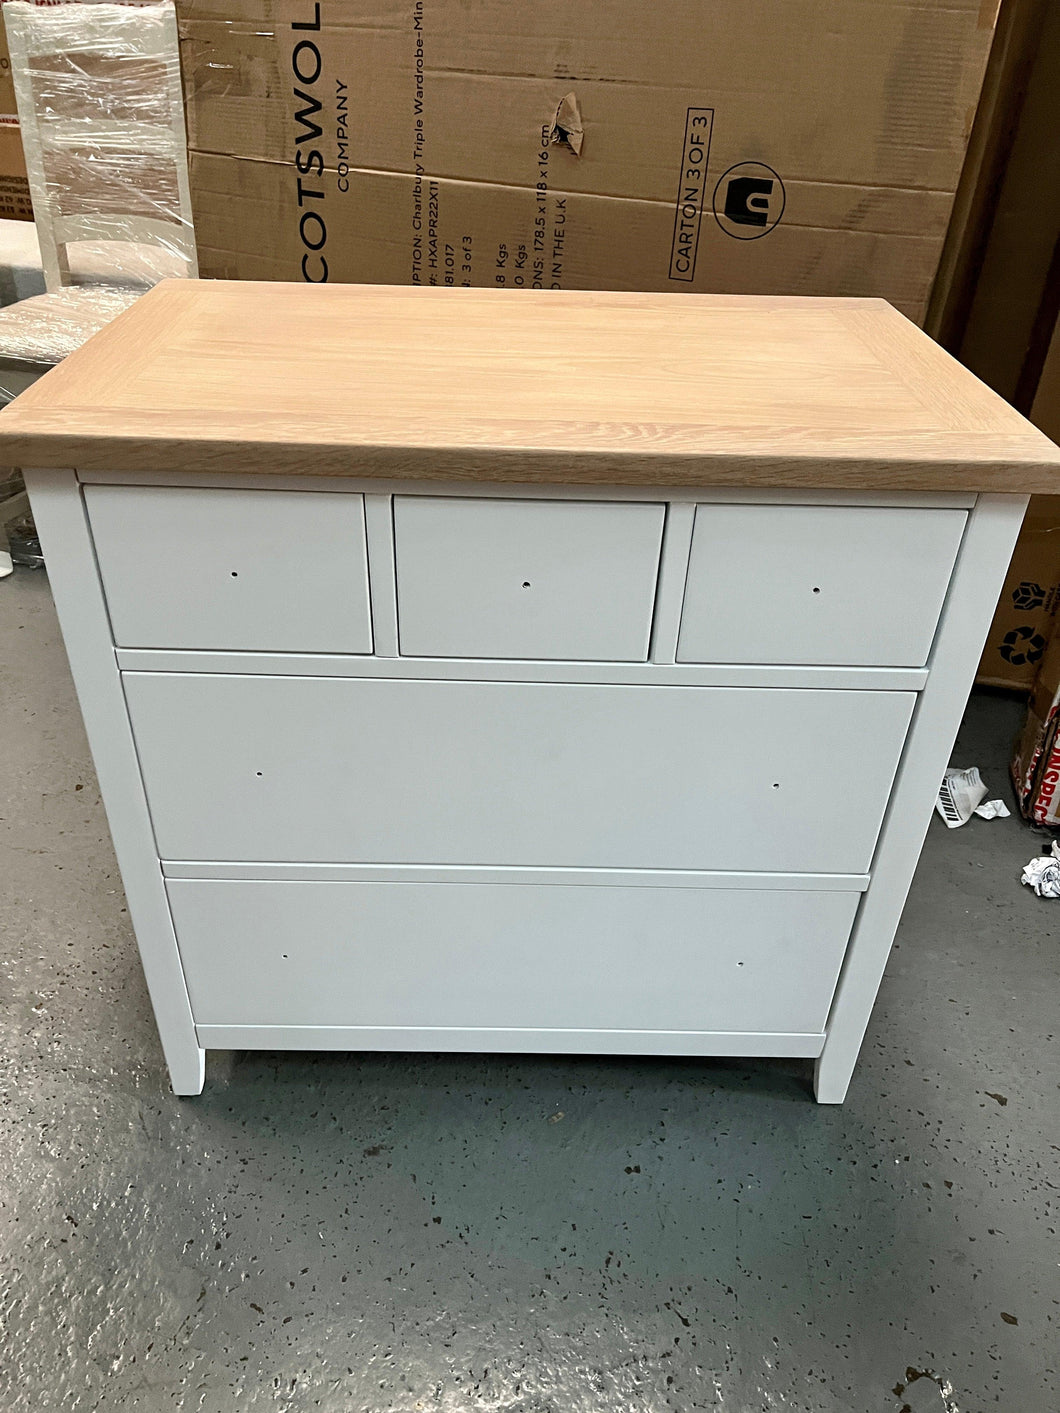 CHESTER PURE WHITE
5 Drawer Chest Quality Furniture Clearance Ltd